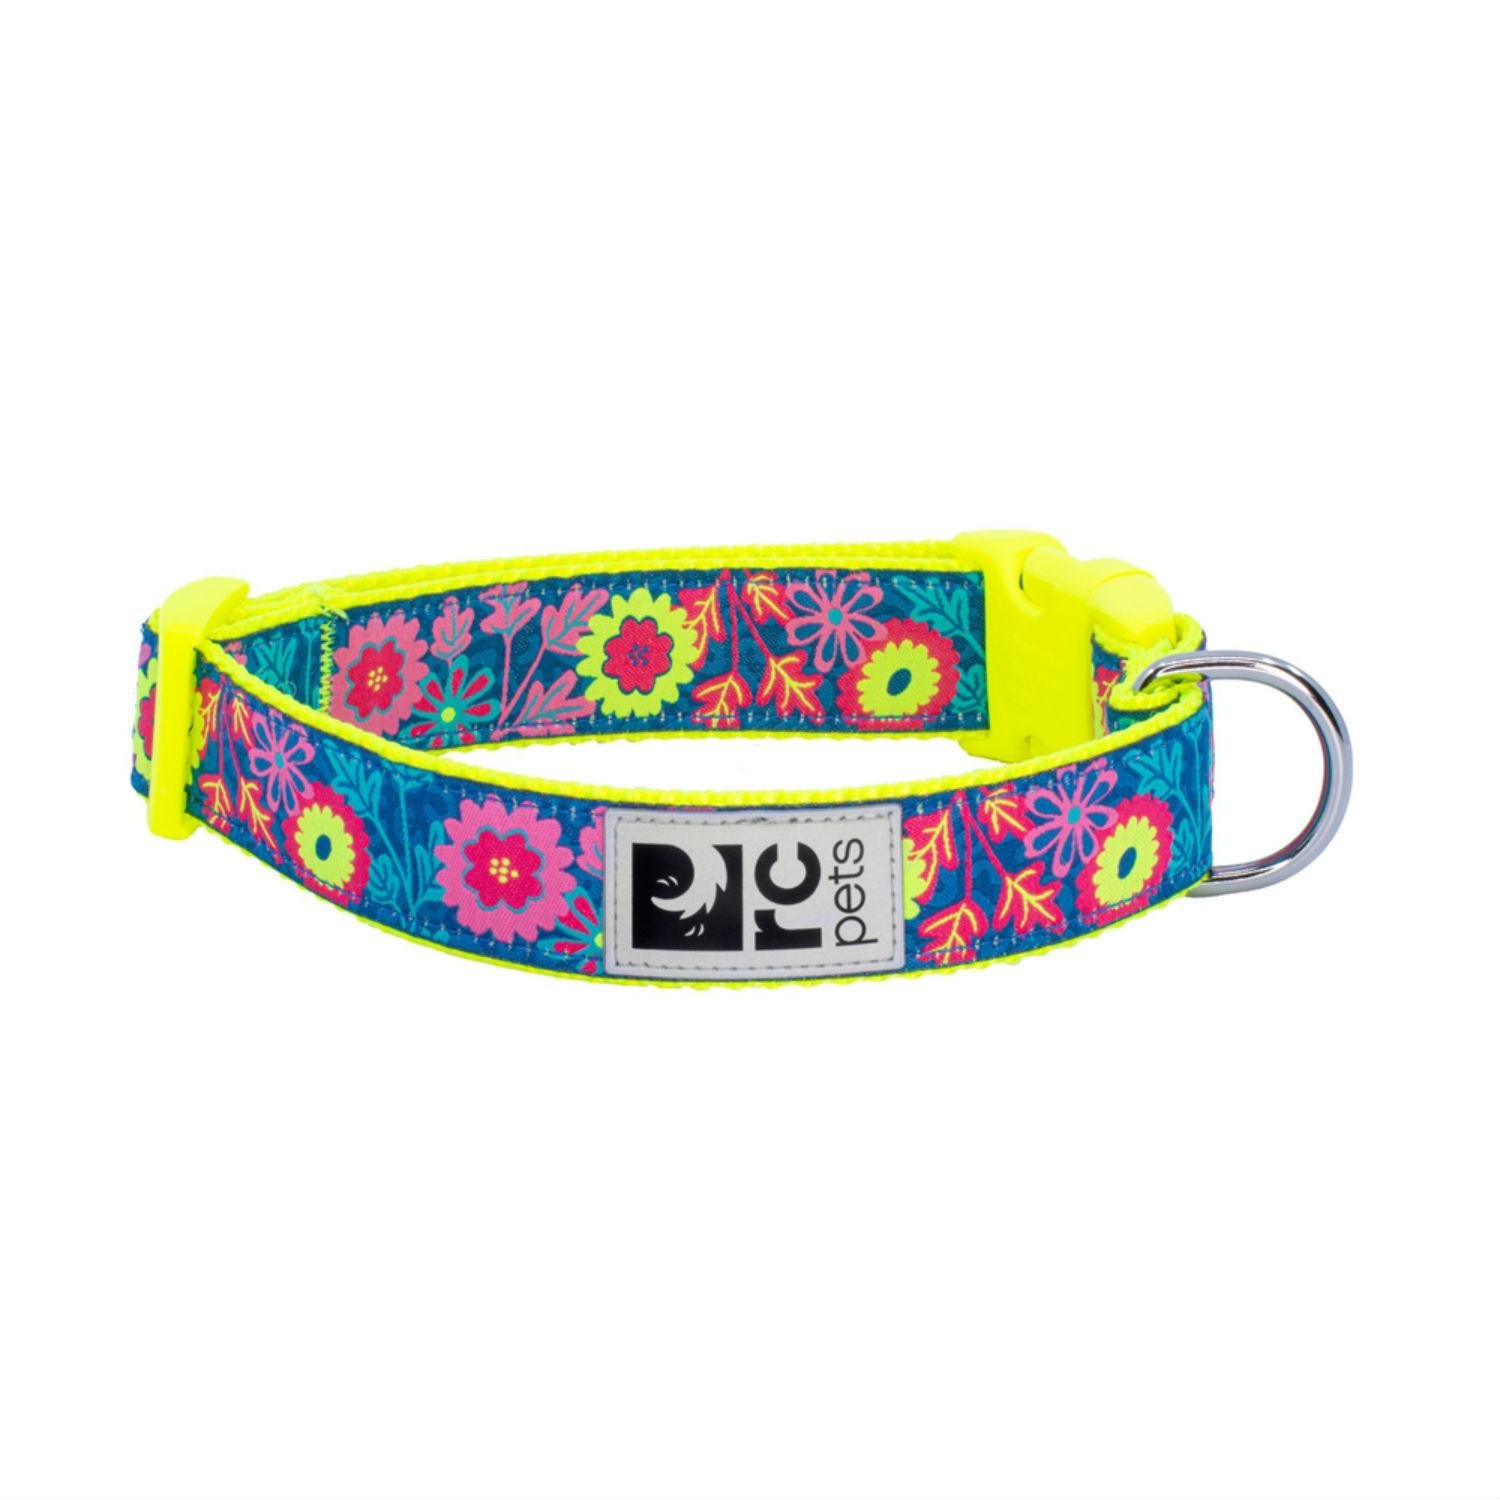 Flower Power Adjustable Dog Collar by RC Pets